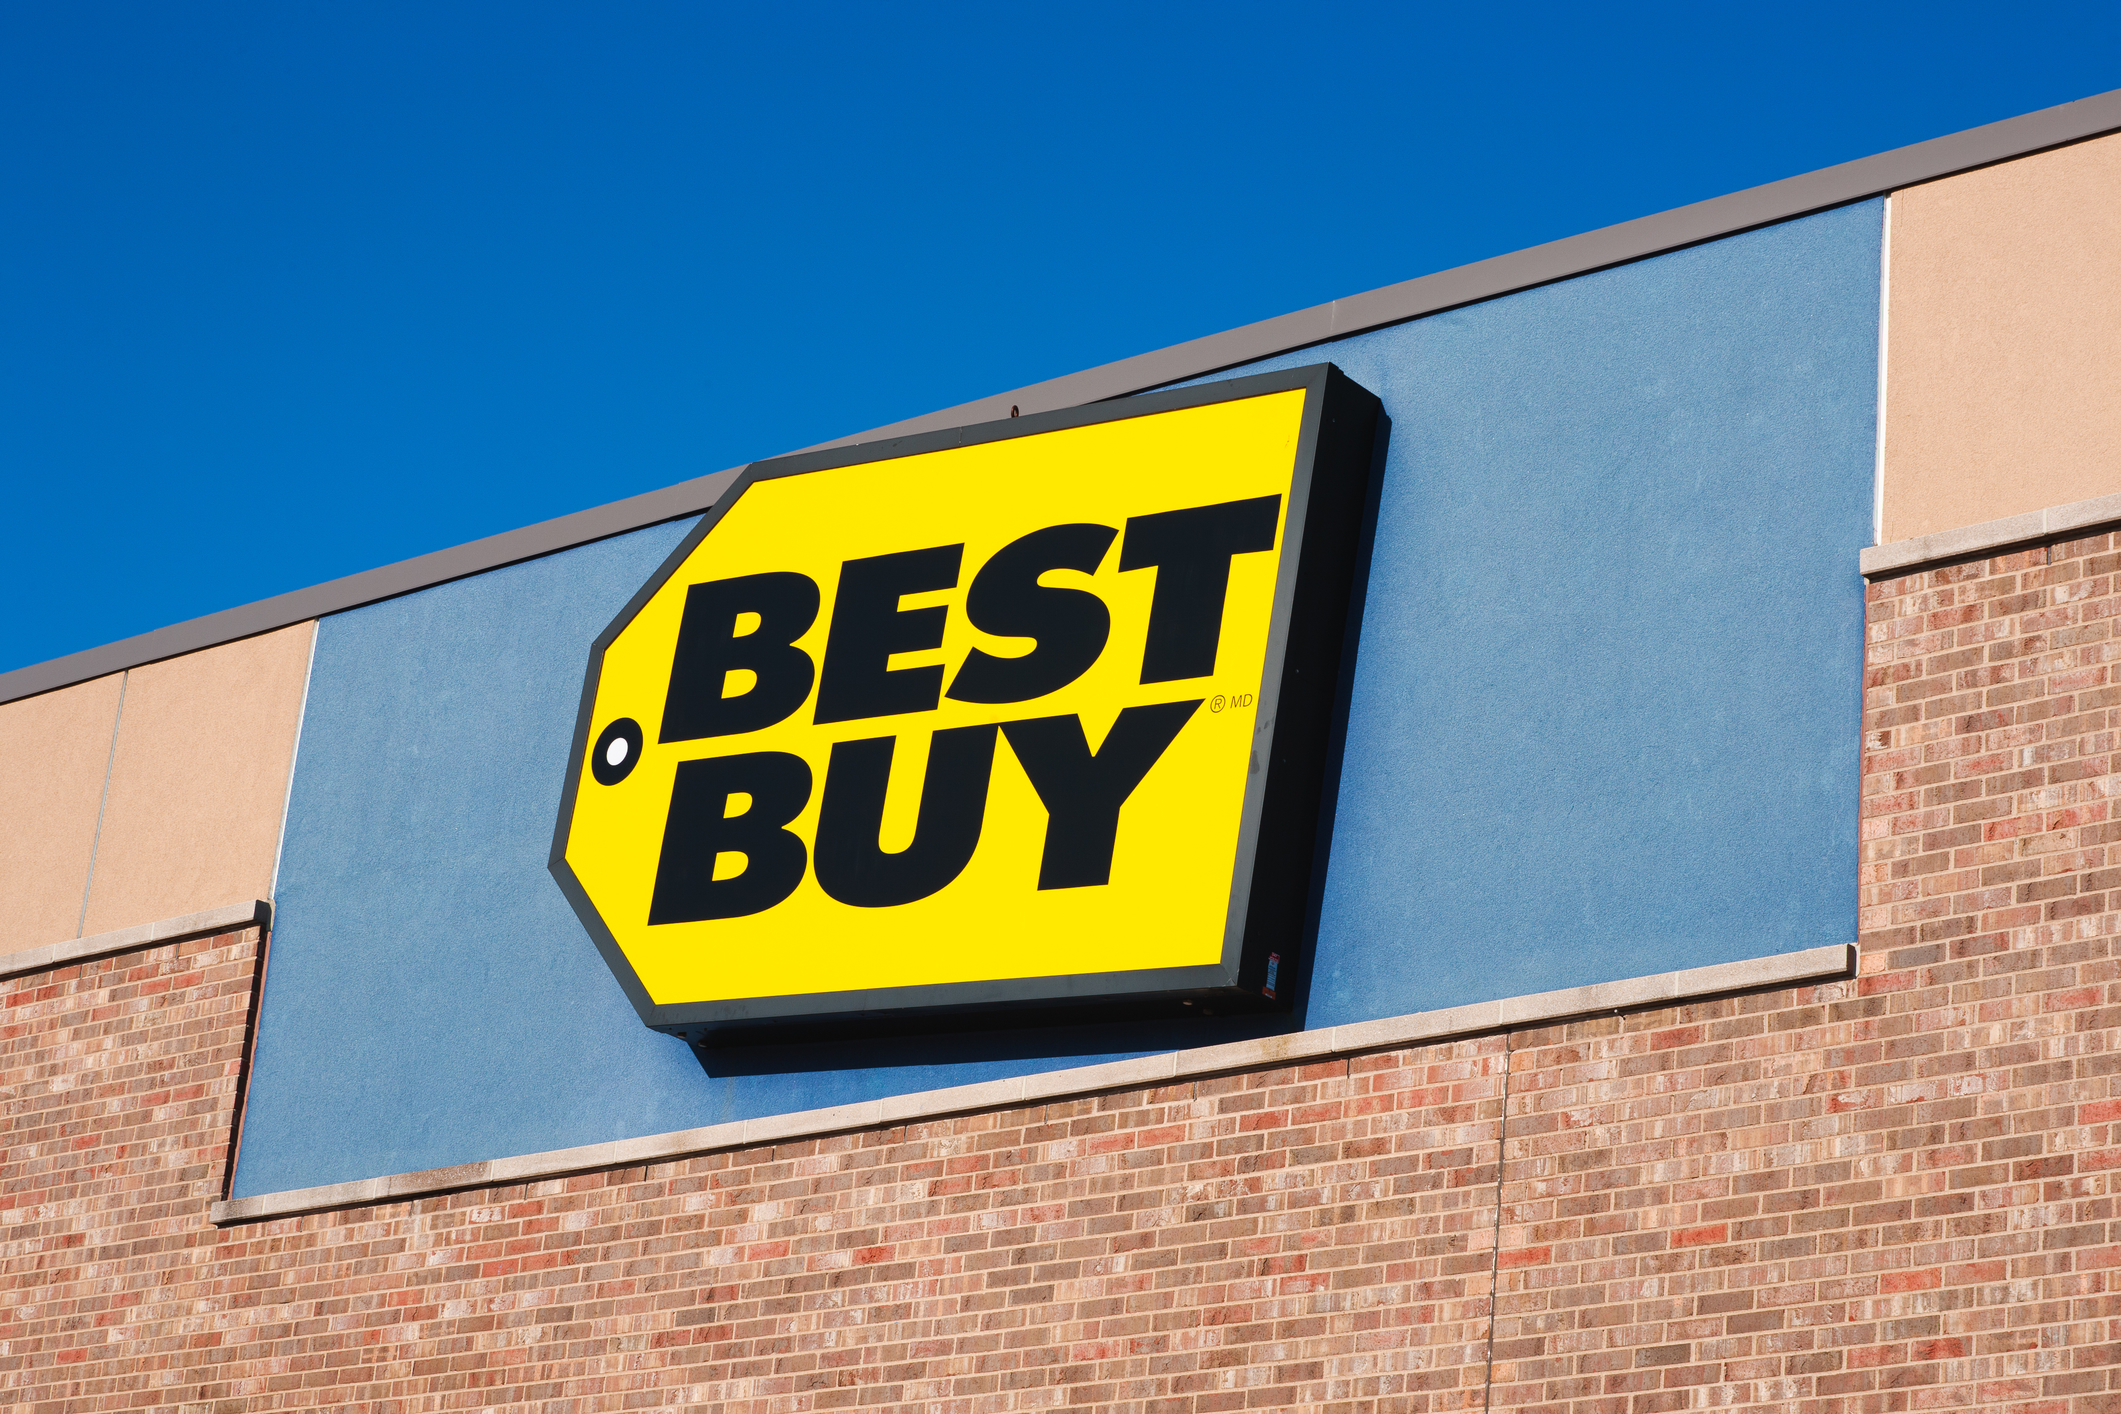 Select Best Buy email subscribers: Look for a $5 to $5,000 reward certificate!